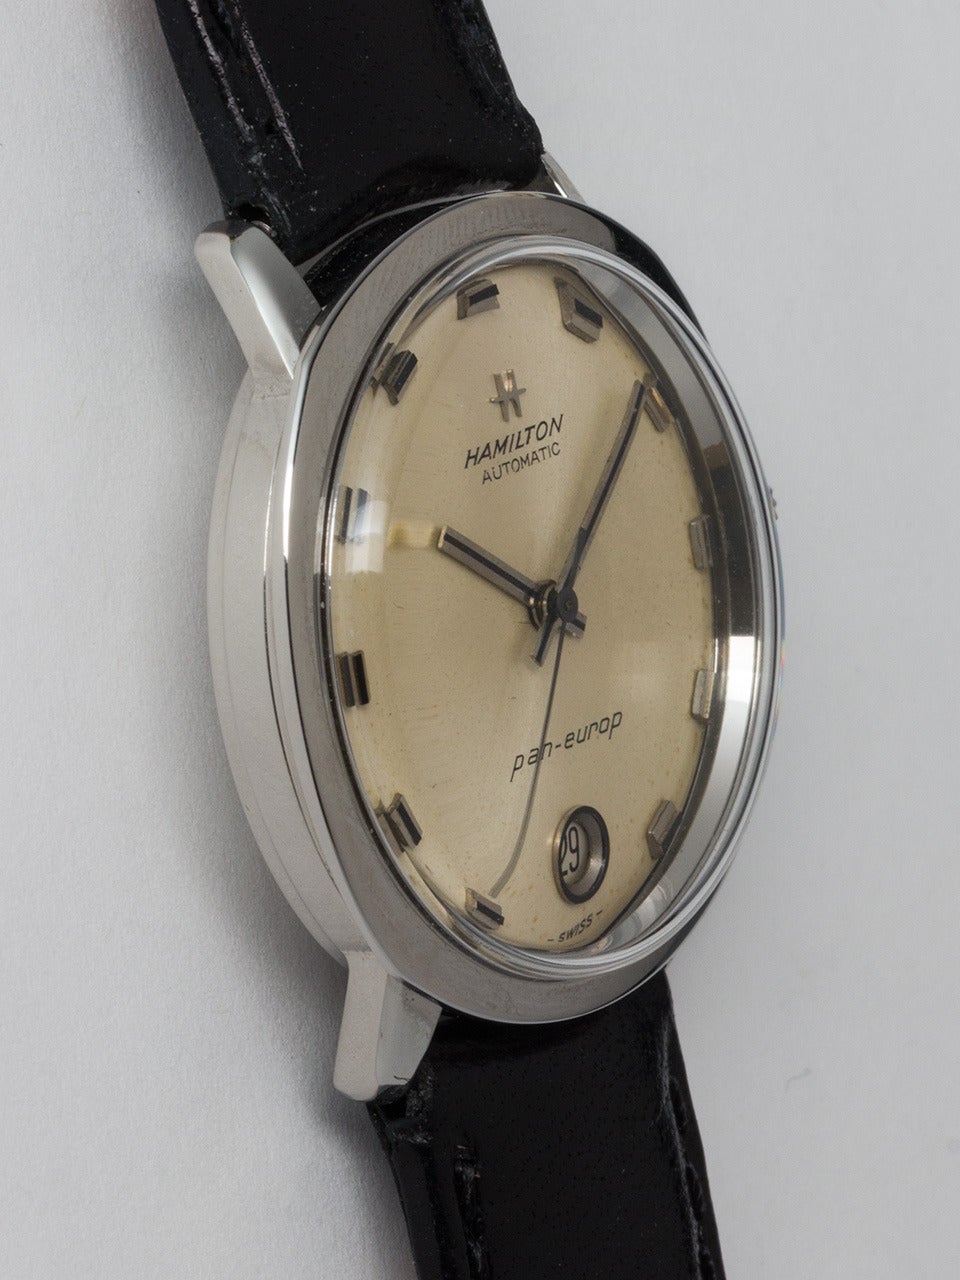 Hamilton Stainless Steel Pan-Europ Wristwatch circa 1960s. 34 X 36mm round case with wide bezel and acrylic crystal. With original silvered satin dial with square indexes and hands, port hole style date window at 6 o'clock, and signed Hamilton